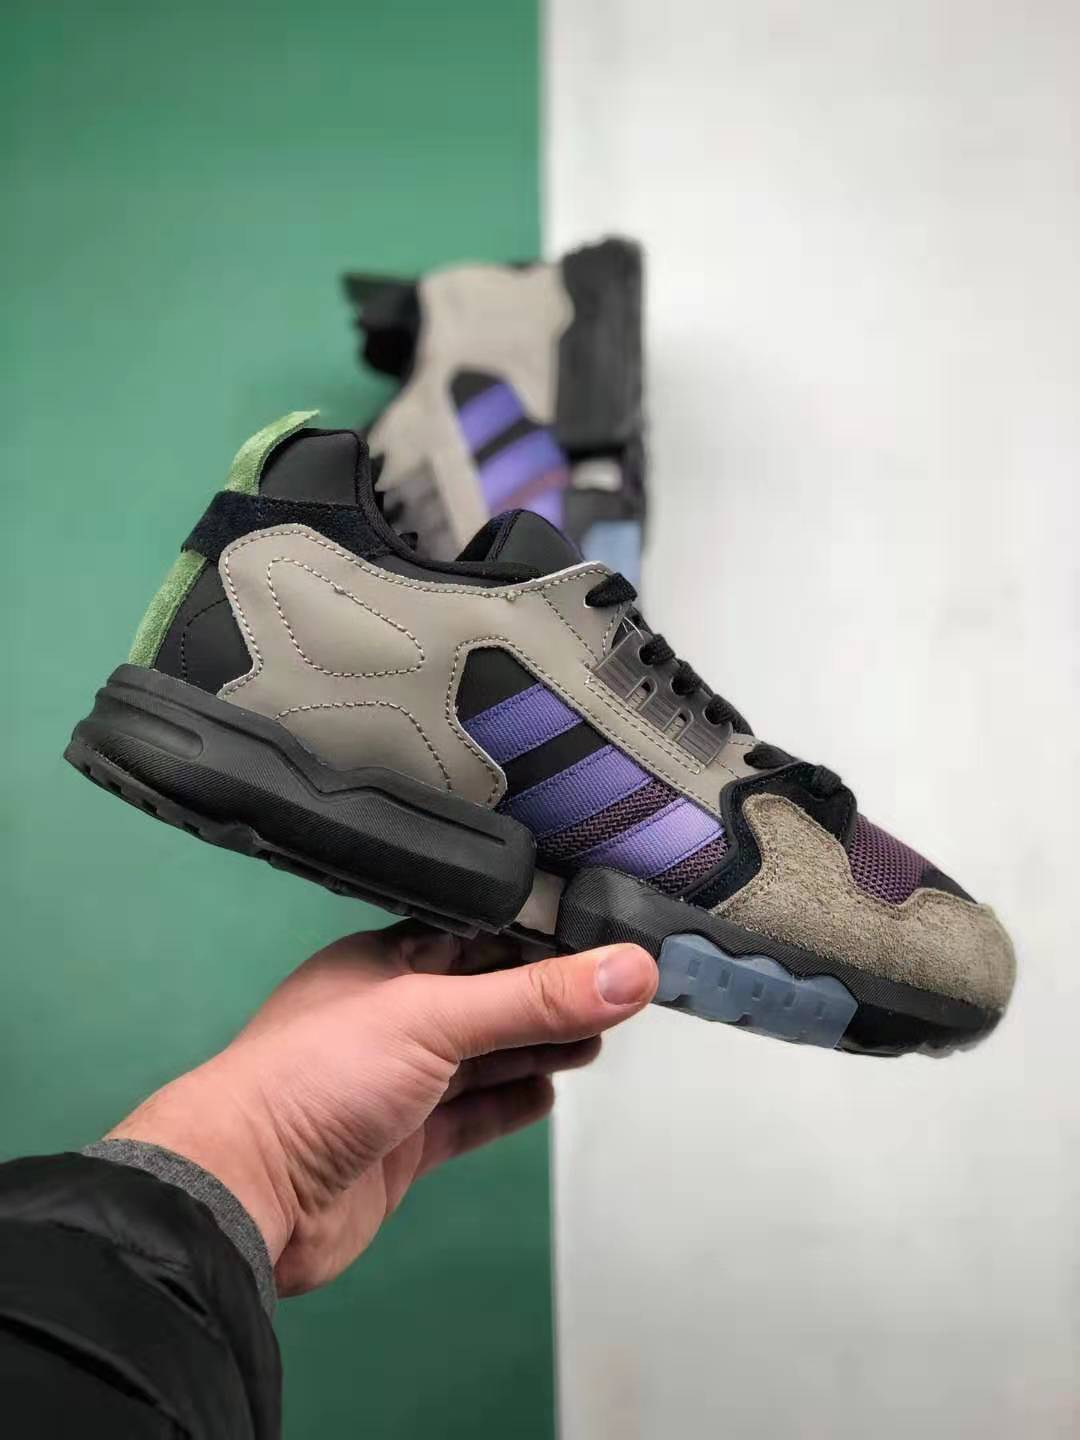 Adidas Packer x Consortium ZX Torsion 'Mega Violet' EF7734 - Exclusive Collaboration for Sneaker Enthusiasts